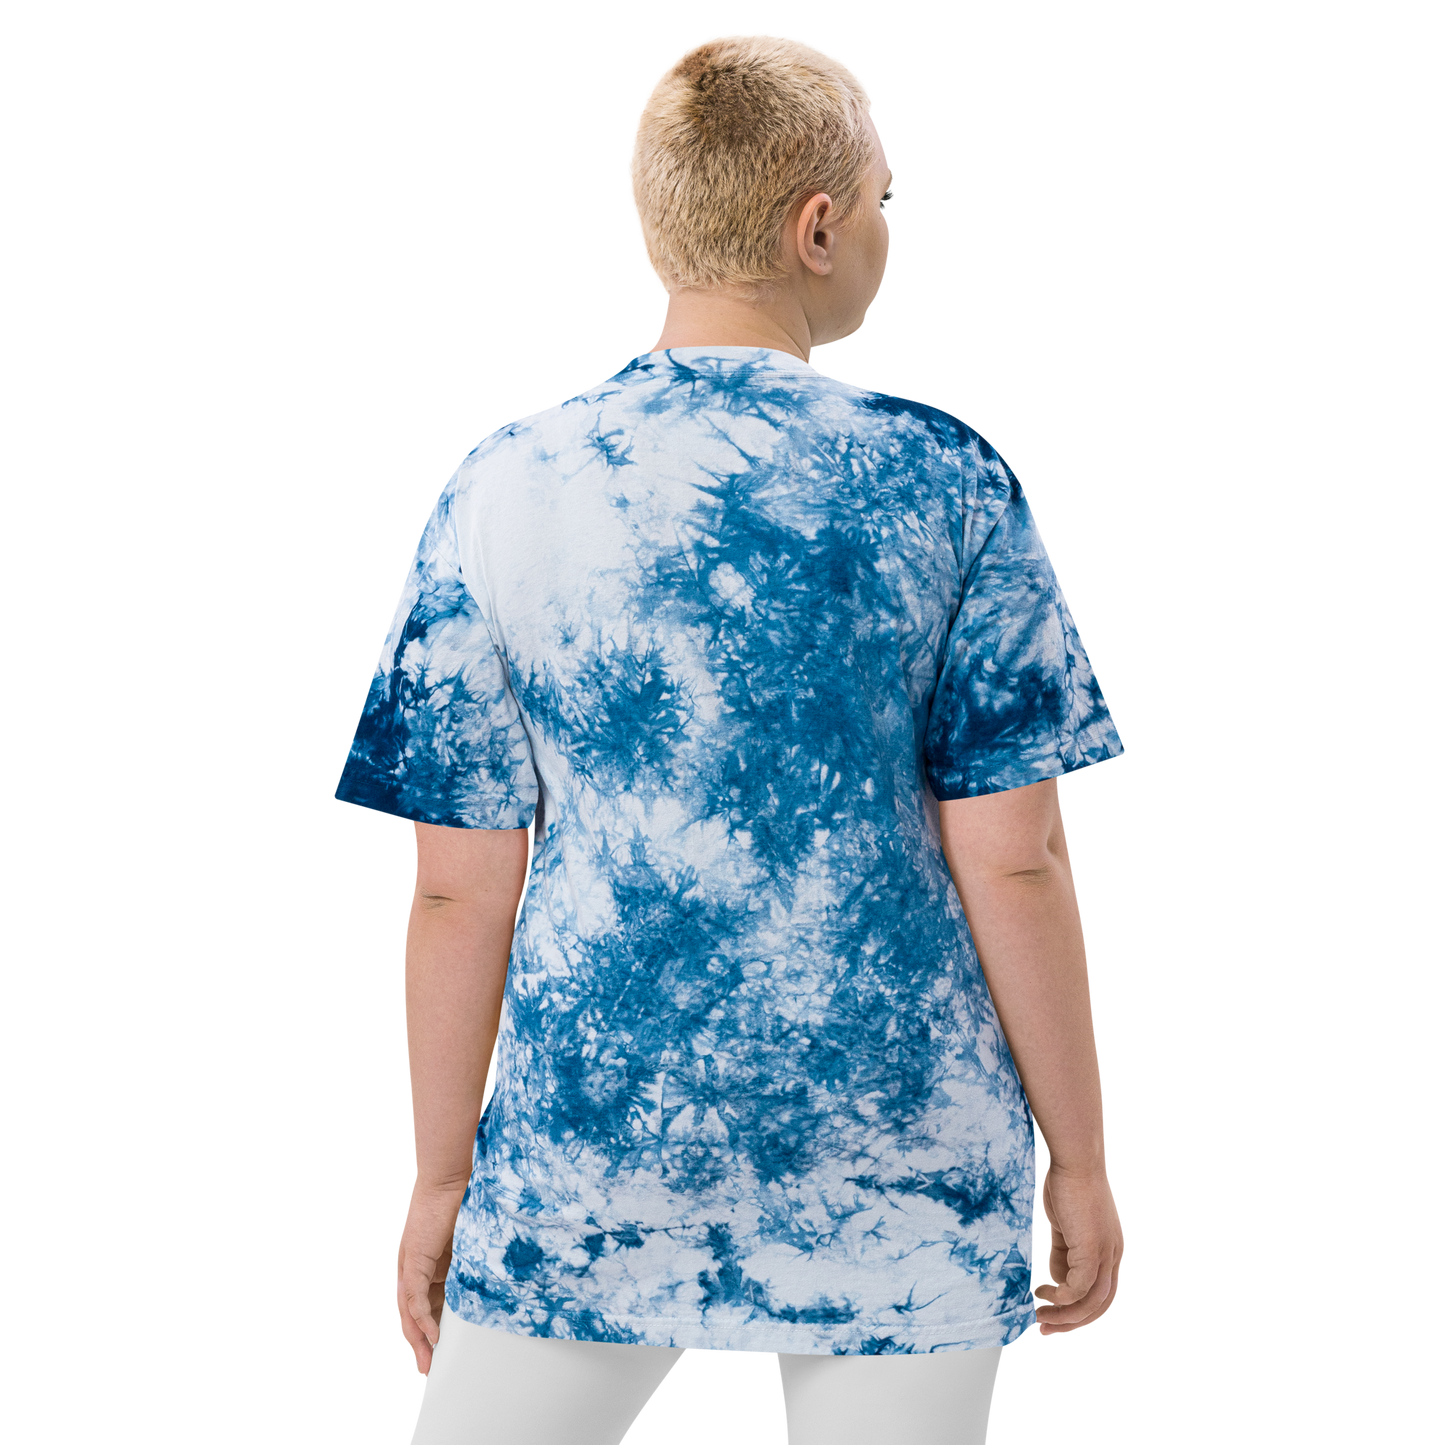 YHM Designs - YXY Whitehorse Oversized Tie-Dye T-Shirt - Crossed-X Design with Airport Code and Vintage Propliner - White Embroidery - Image 09